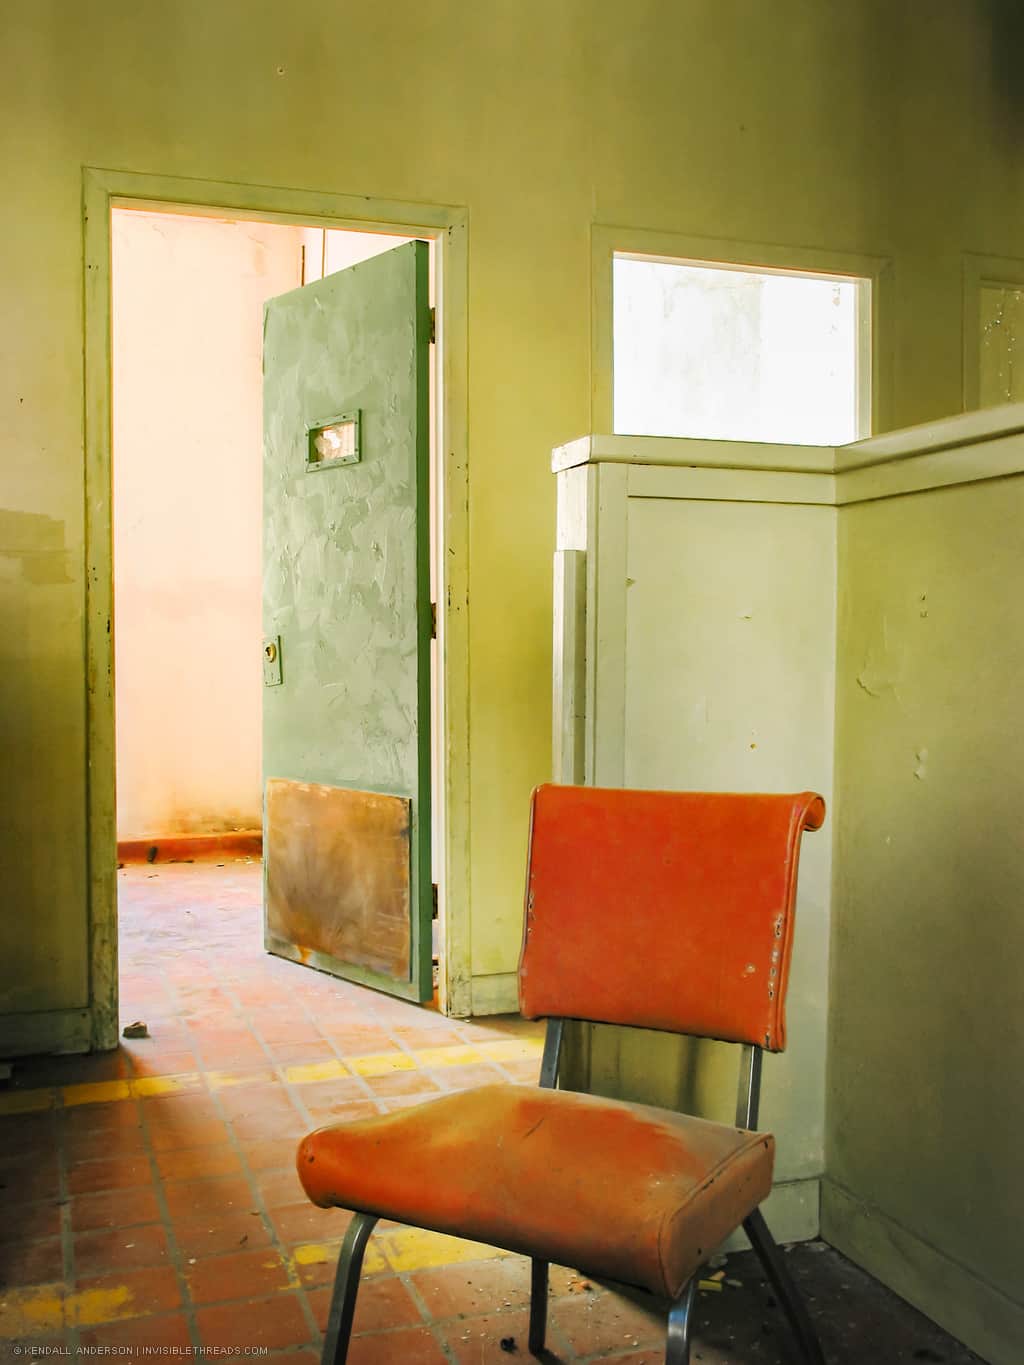 An orange chair sits in front of an open green door. The door is solid, but has a very small slot window at eye level for viewing the occupants of the room. The floor is orange tile, dirty and dusty.